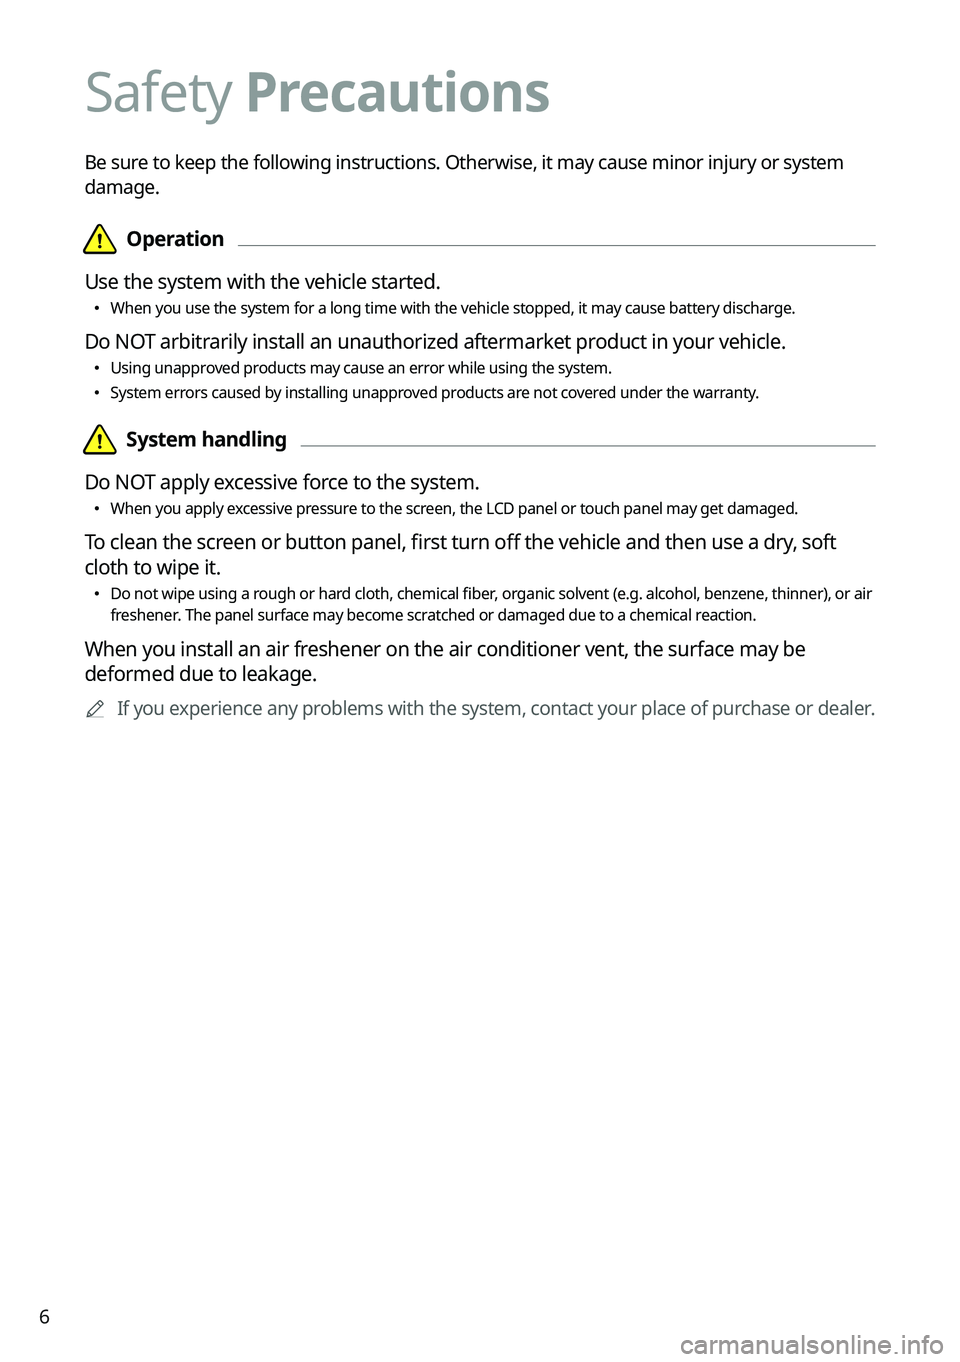 KIA NIRO PHEV 2022  Navigation System Quick Reference Guide 6
Safety Precautions
Be sure to keep the following instructions. Otherwise, it may cause minor injury or system 
damage.
  